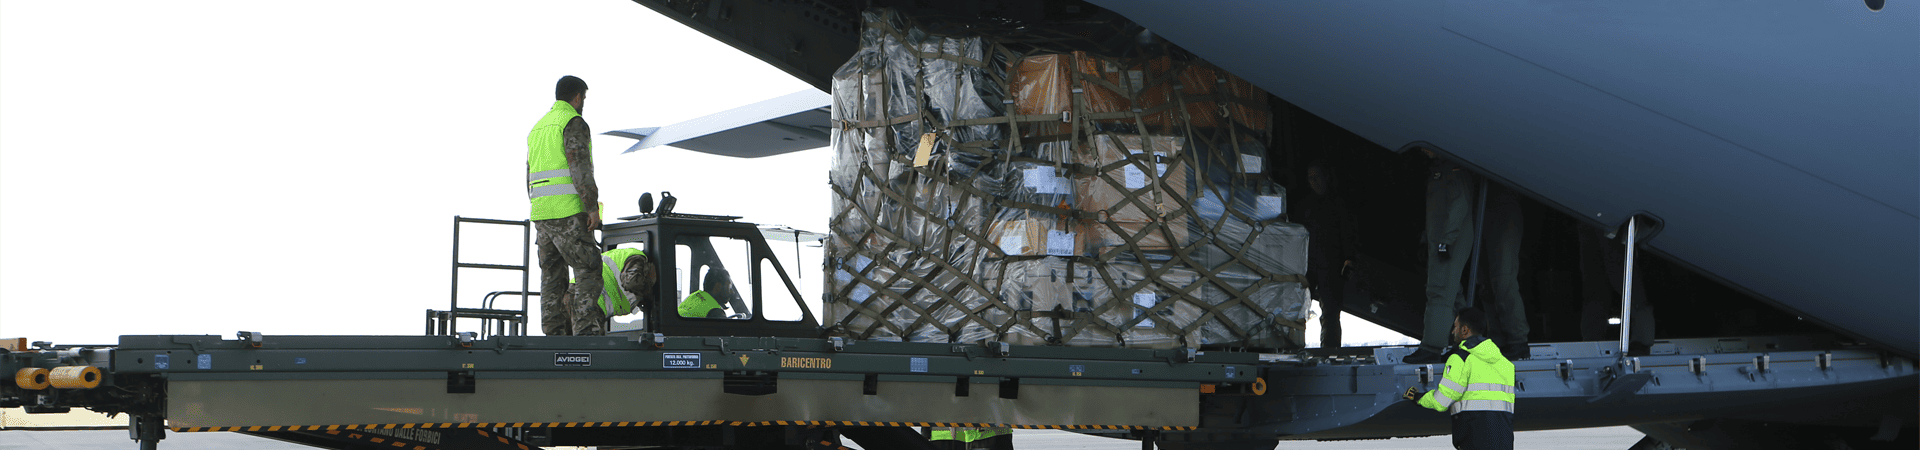 Loading a400m with pallet optimized and secured by clos